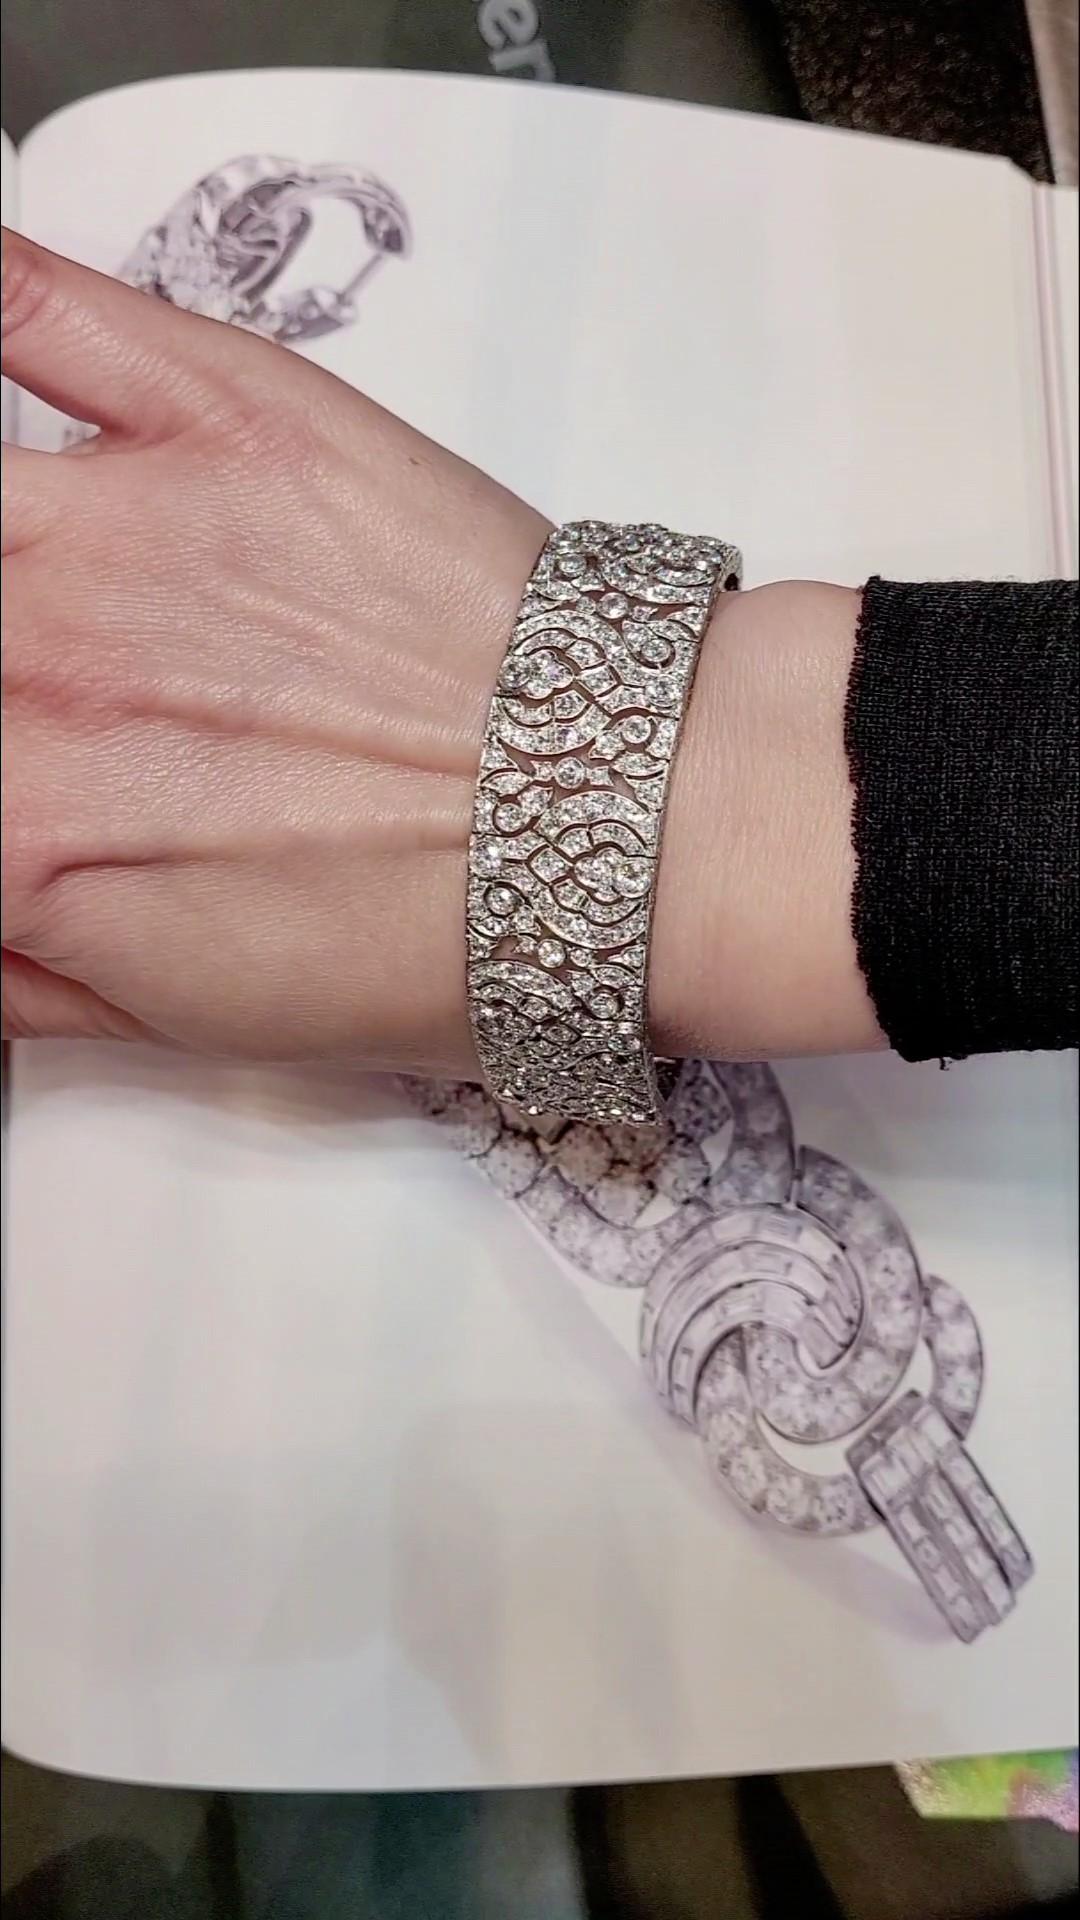 Art Deco style is characterized by bold geometry and decadent detail work. 
Dated back to 1920-40s, the style still brings in glamour, luxury, along with 
symmetrical designs.
This elegant bracelet made in 1930s features 450 old-cut diamonds